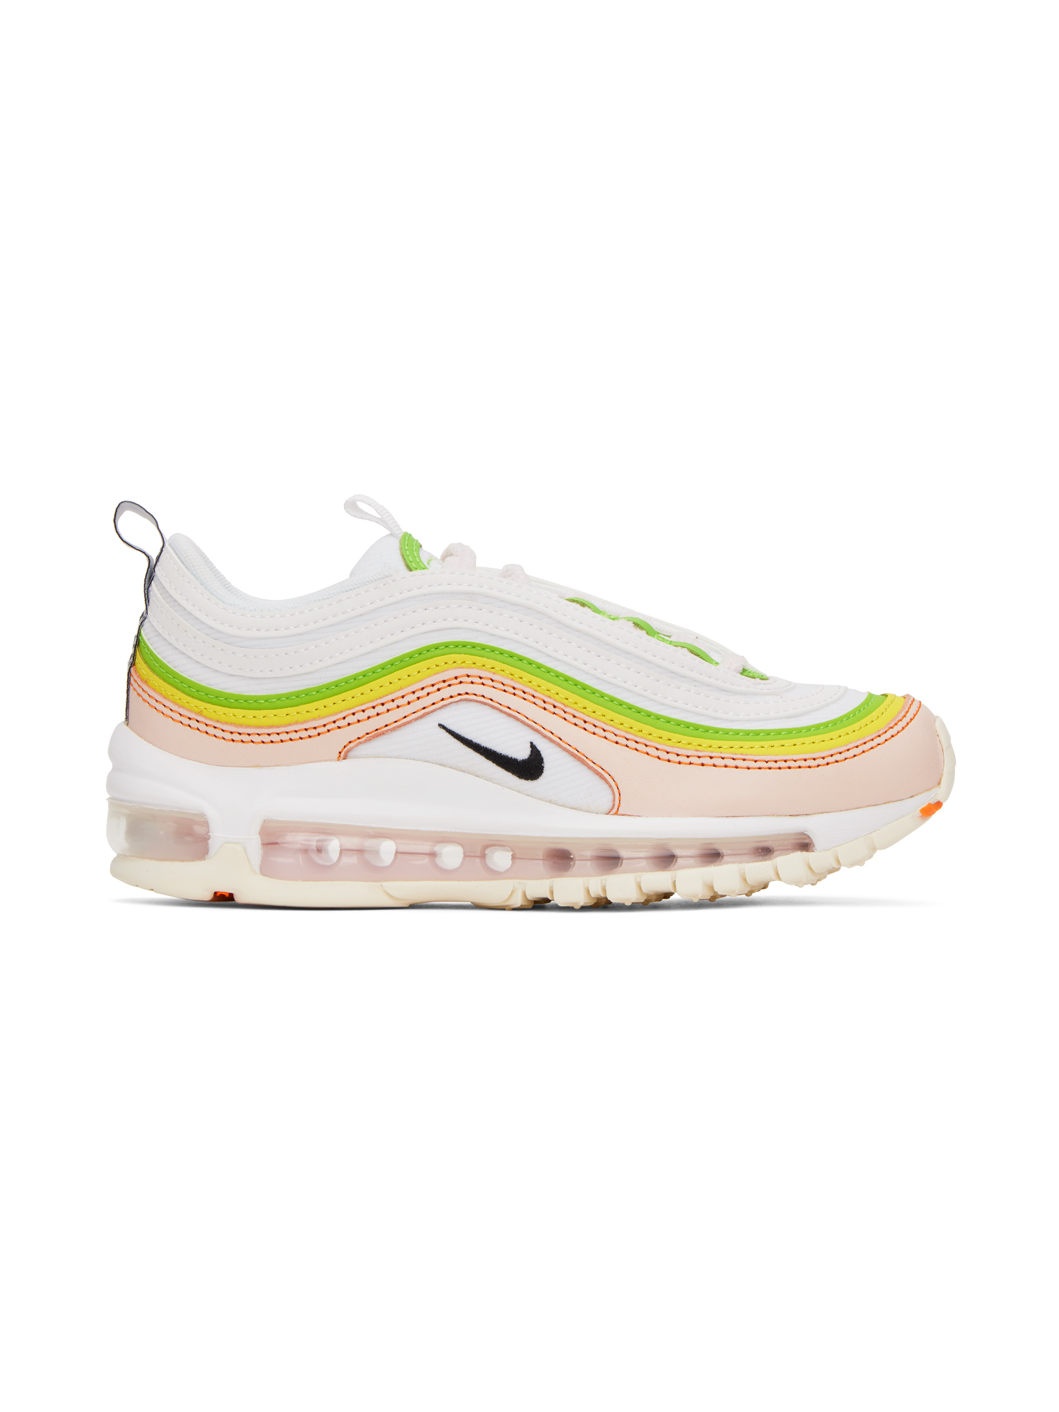 White & Pink Air Max 97 Sneakers - 1